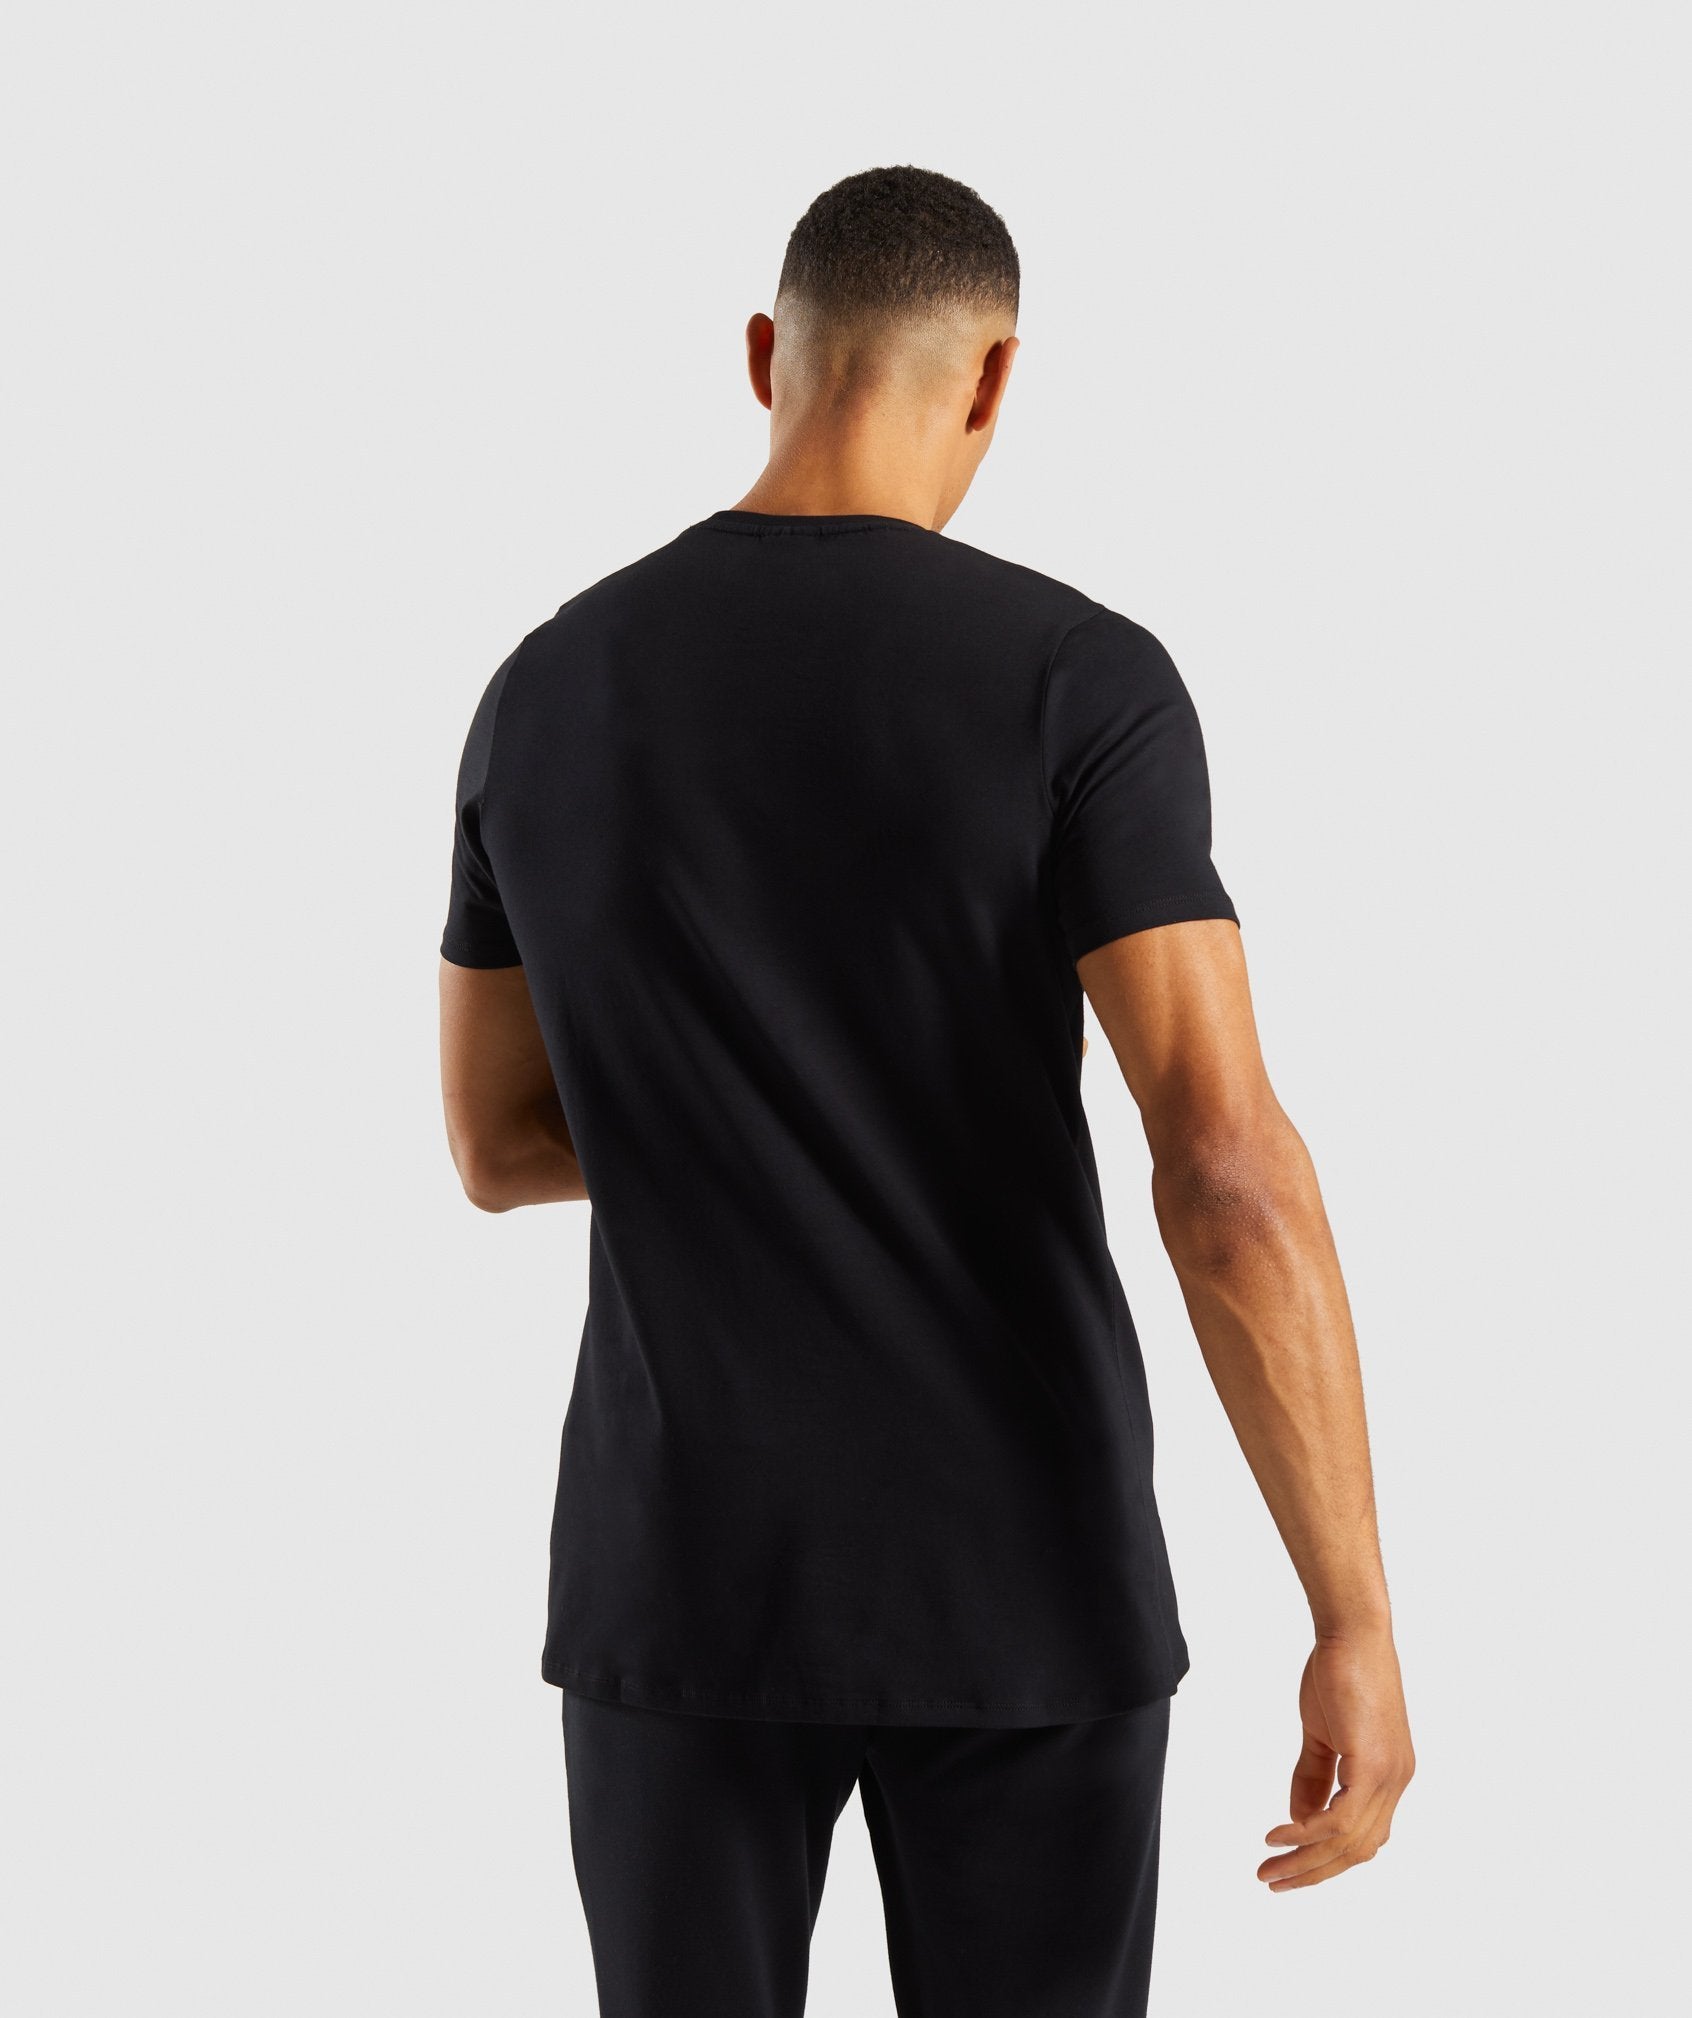 Reverse T-Shirt in Black - view 2